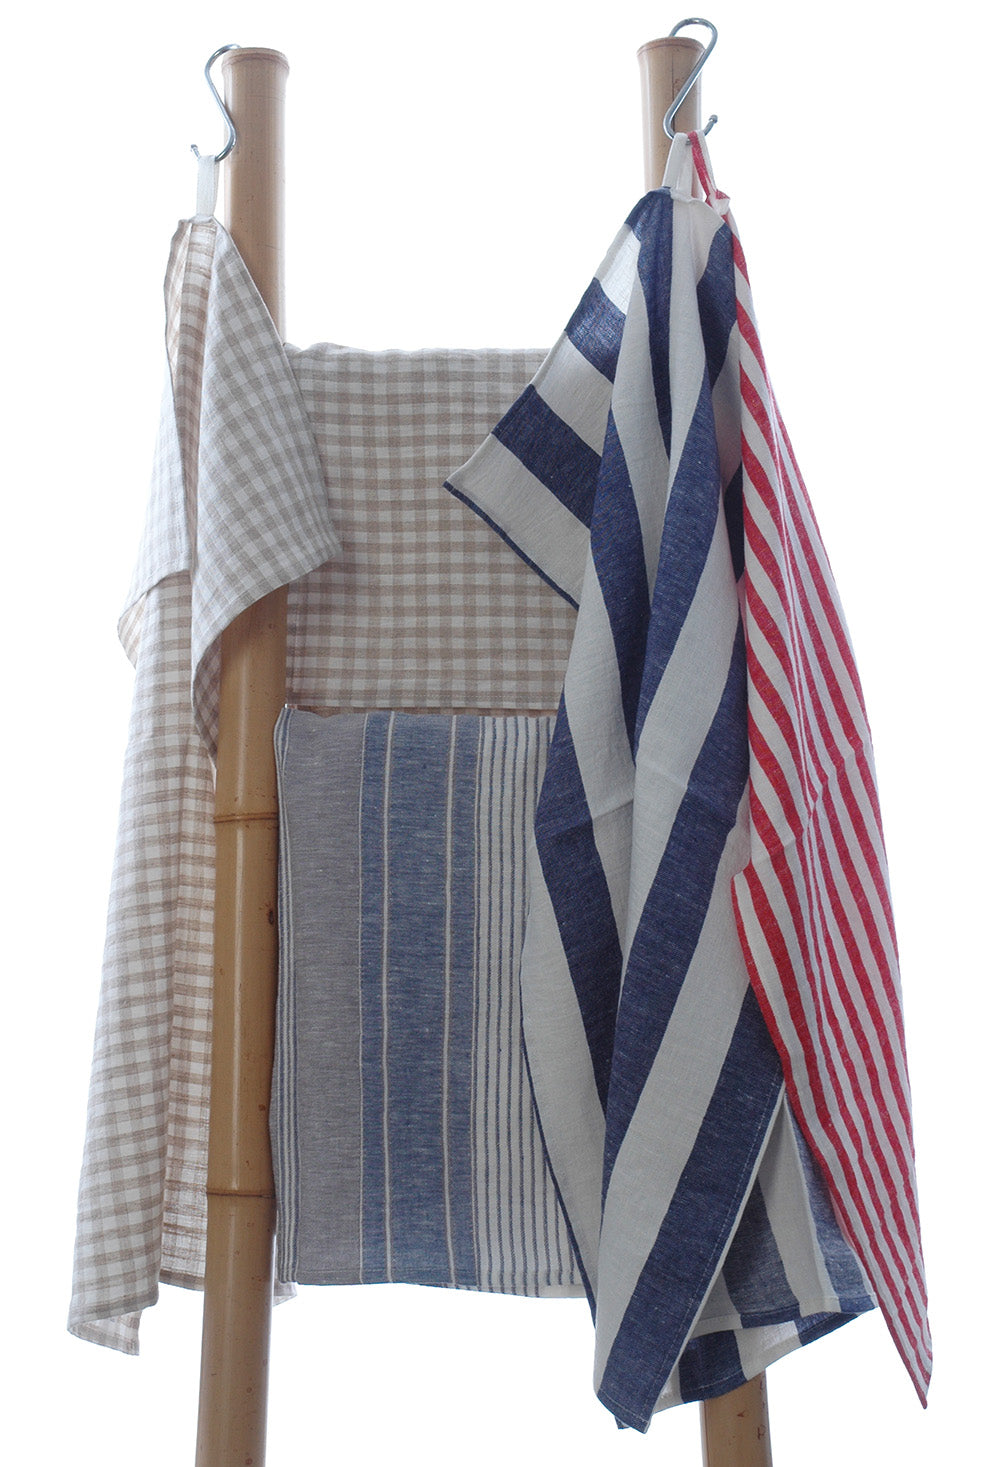 Large Pure Linen Tea Towels in Blue and White Stripe 75x50cm